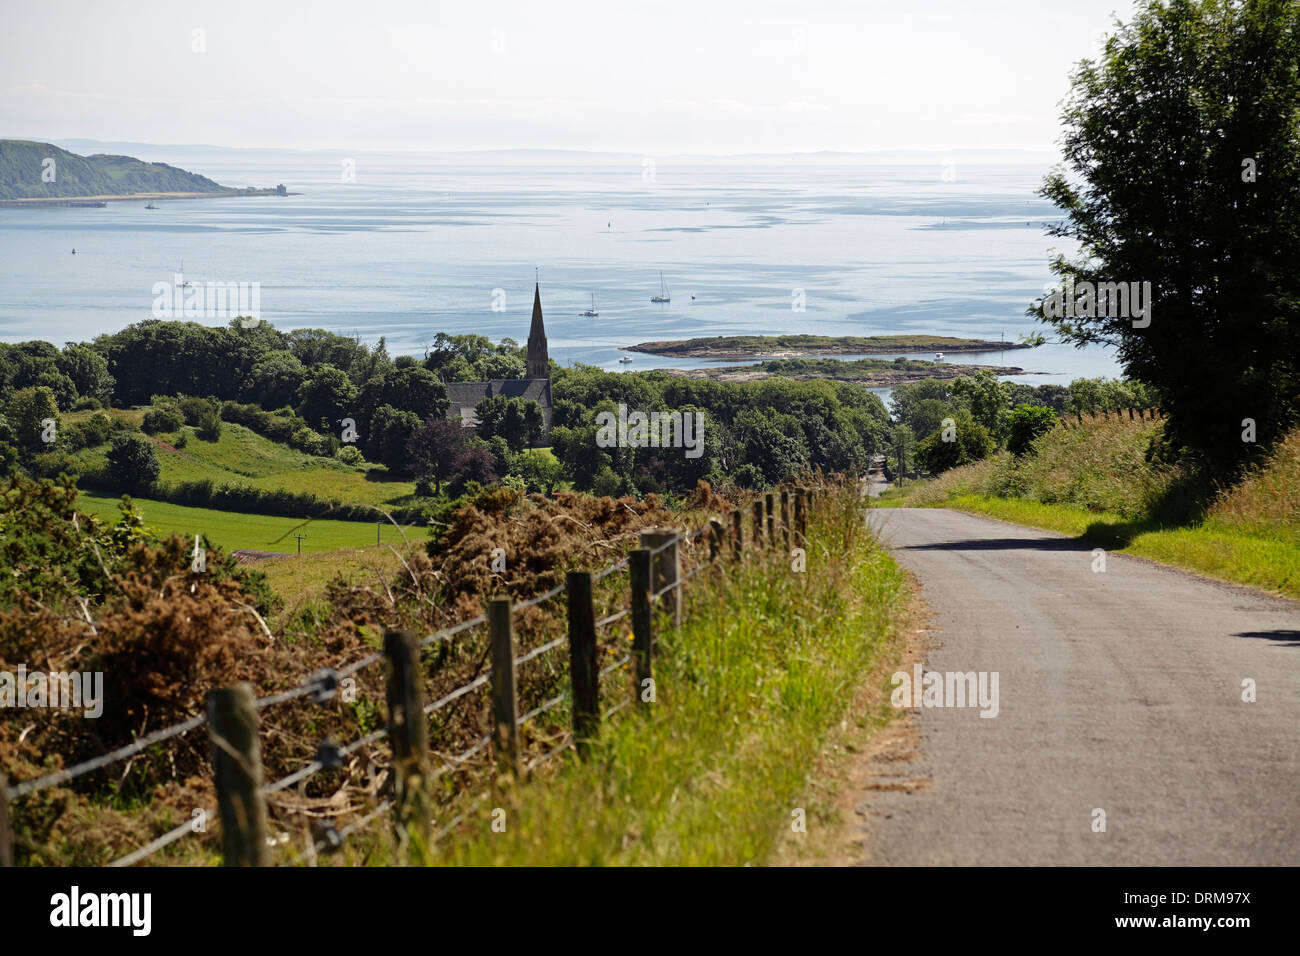 View South over Millport and the Firth of Clyde from Gladstone Hill on the Island of Great Cumbrae, North Ayrshire, Scotland, UK Stock Photo